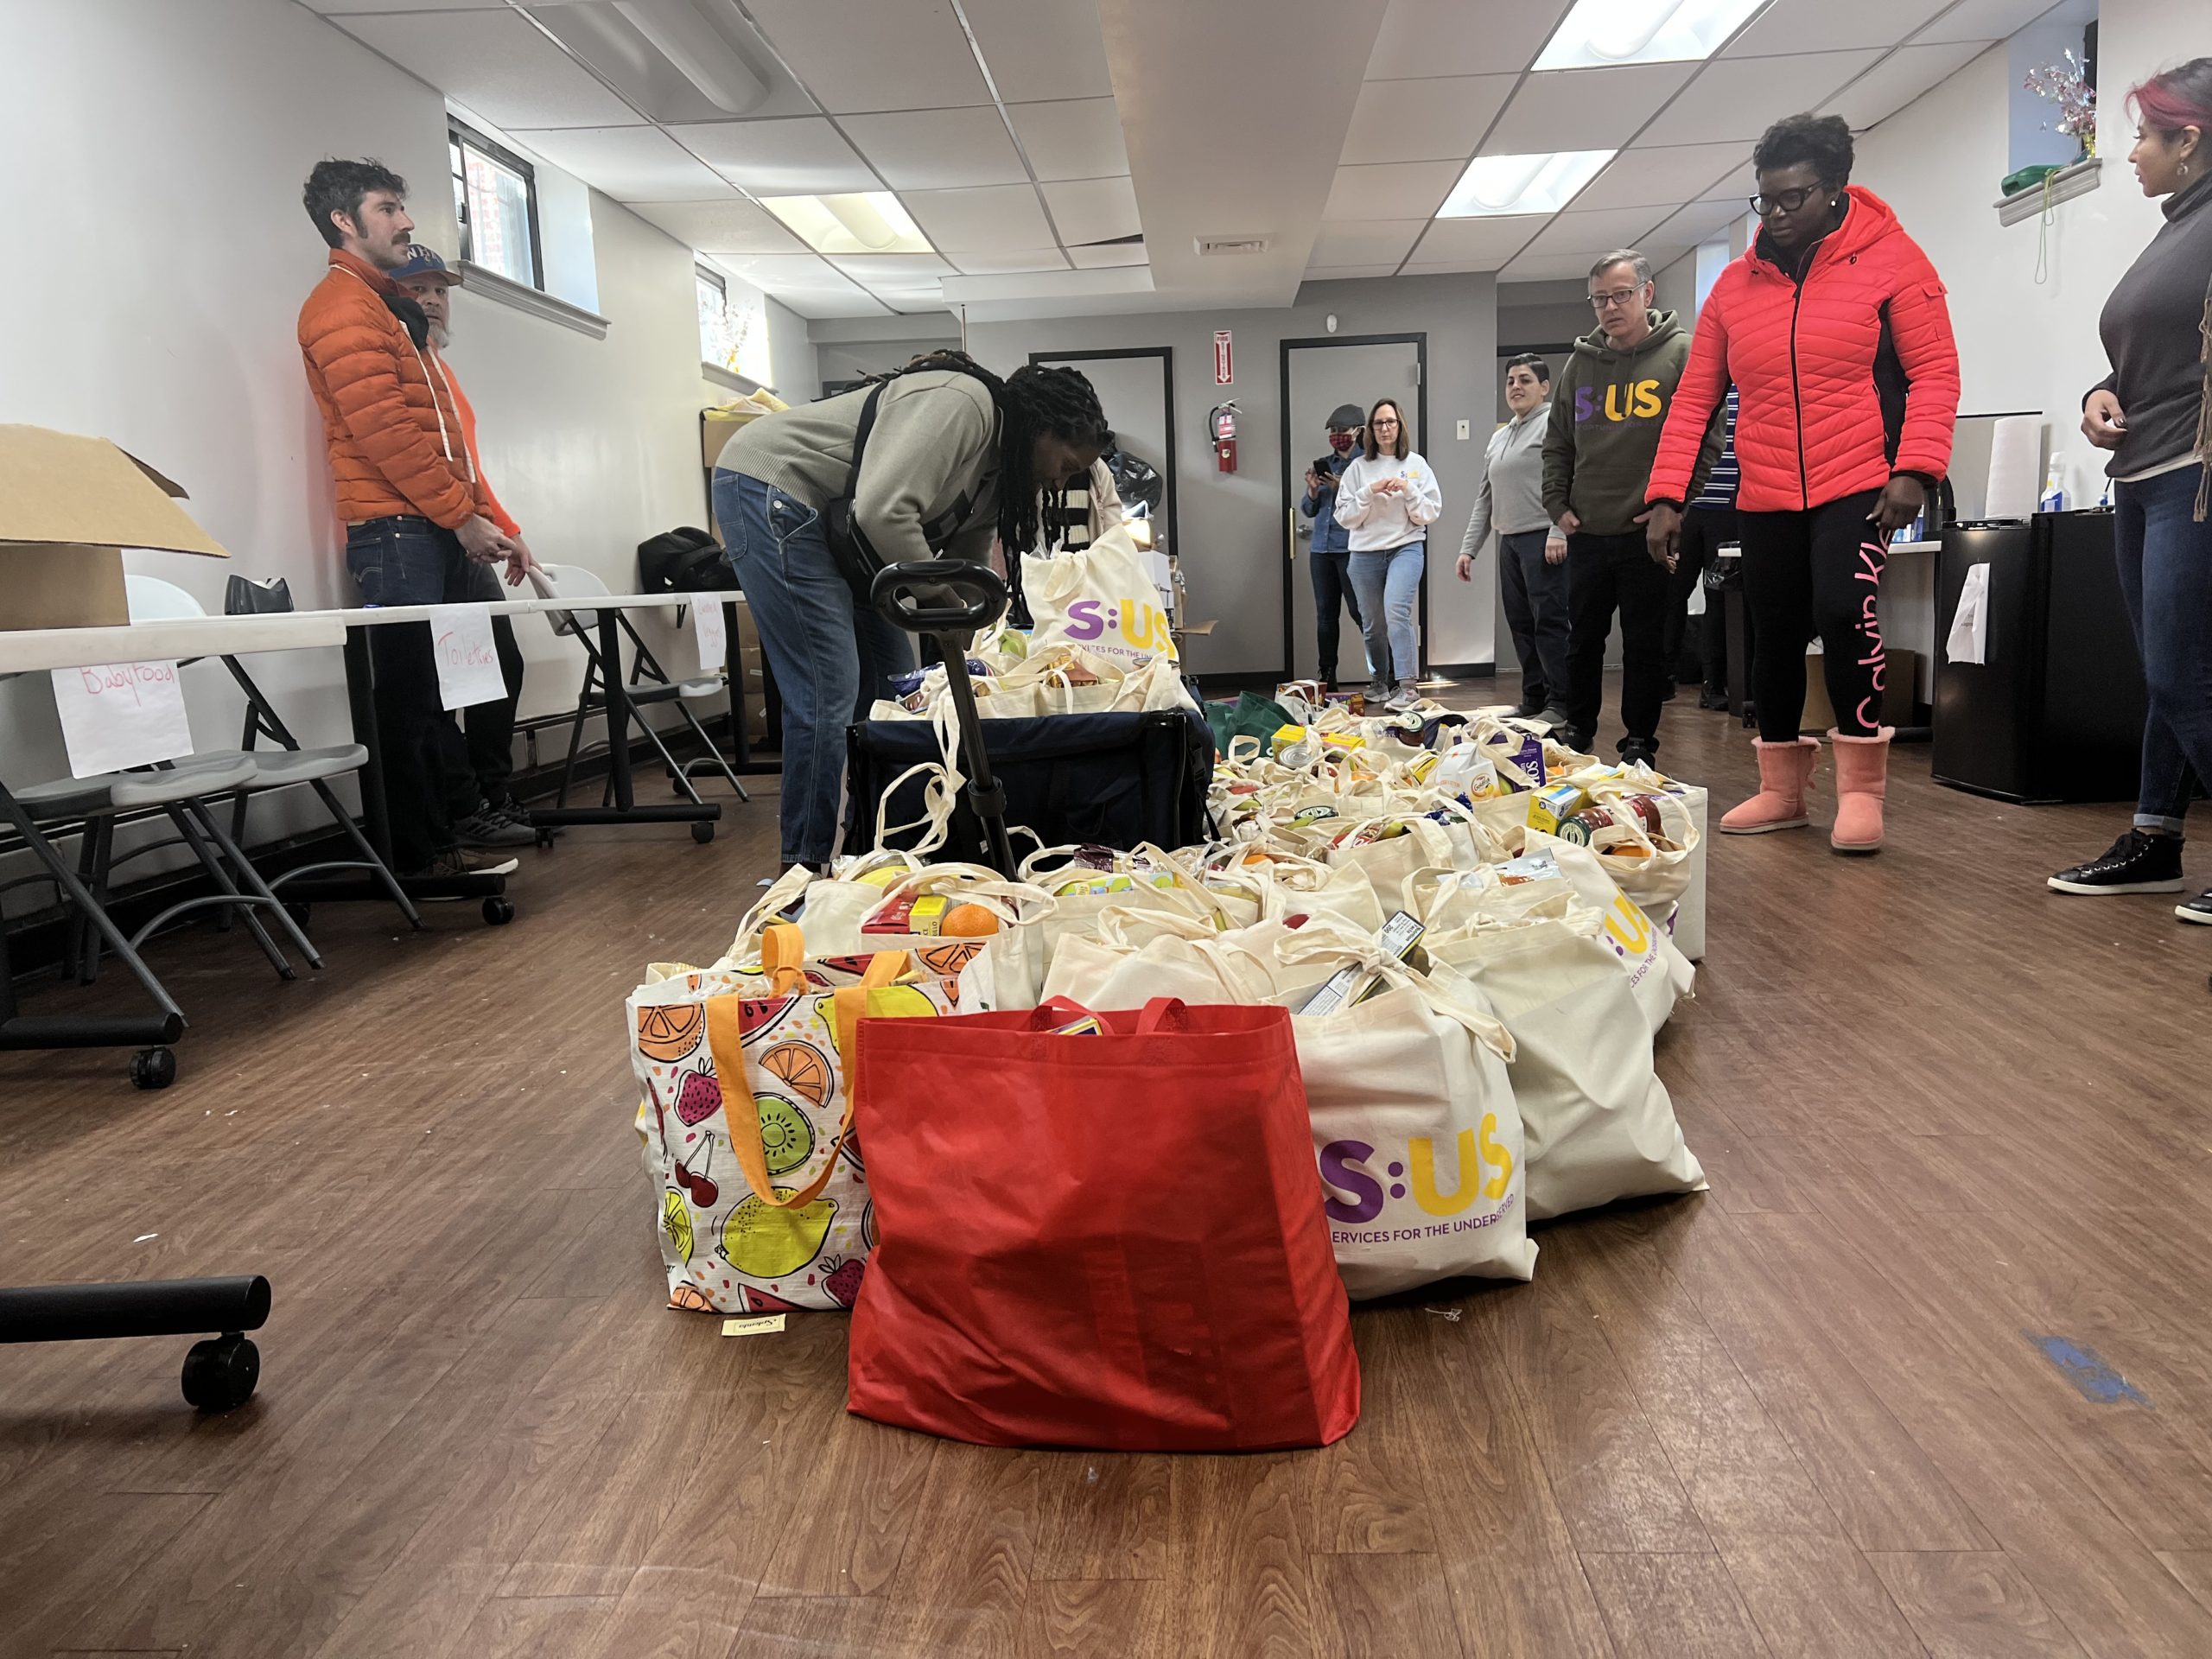 S:US holds MLK Food Drive in South Ozone Park